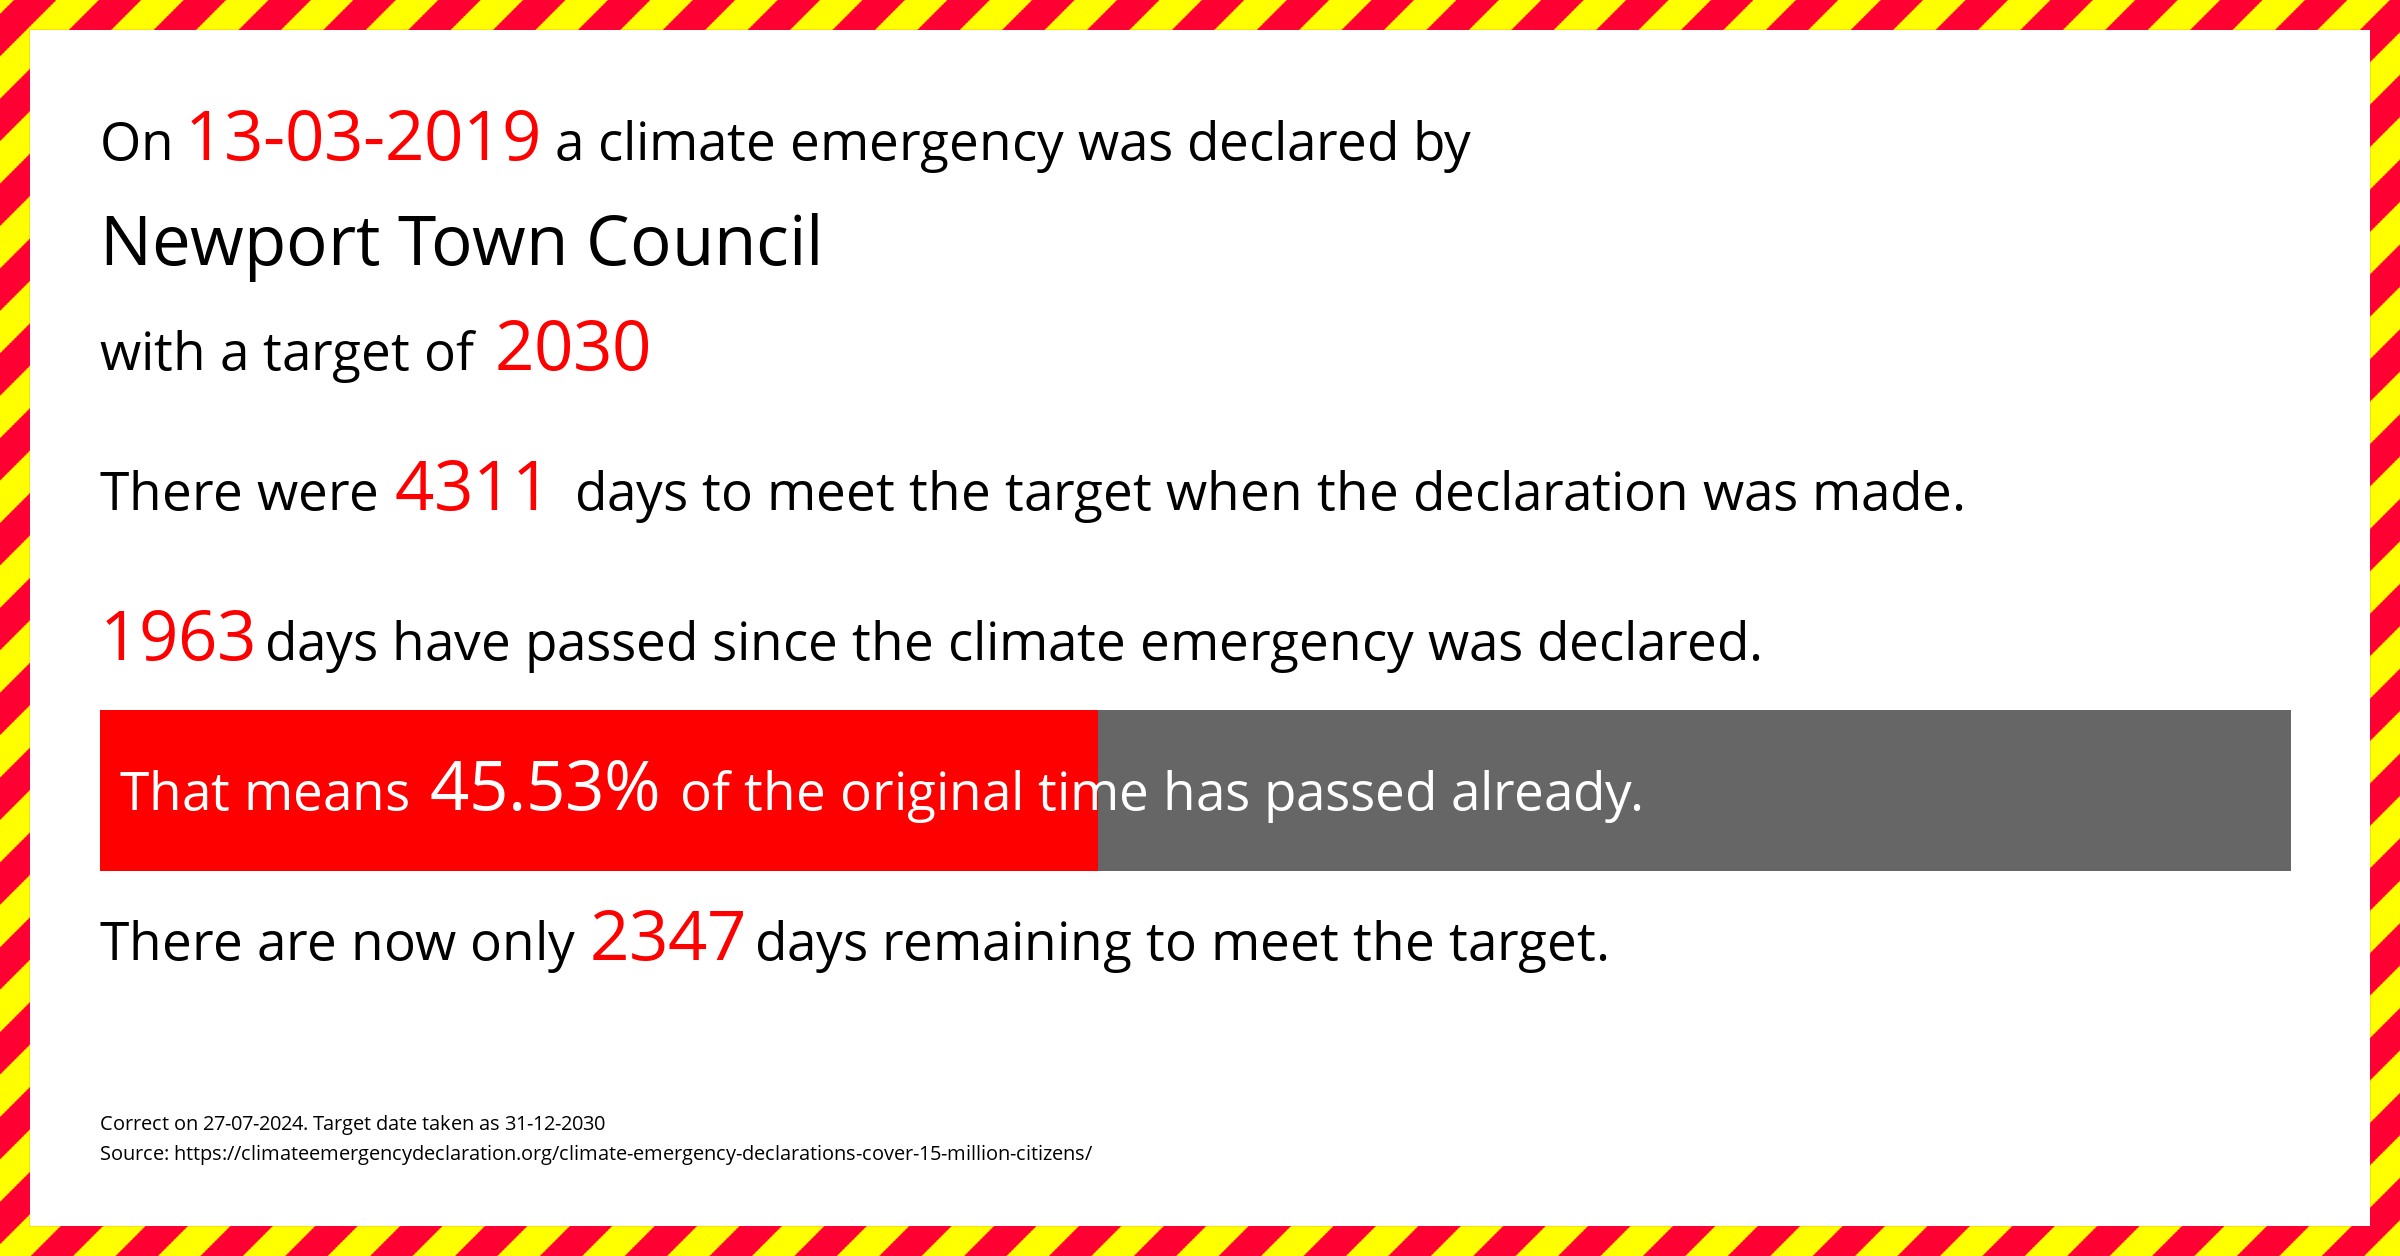 Newport Town Council declared a Climate emergency on Wednesday 13th March 2019, with a target of 2030.